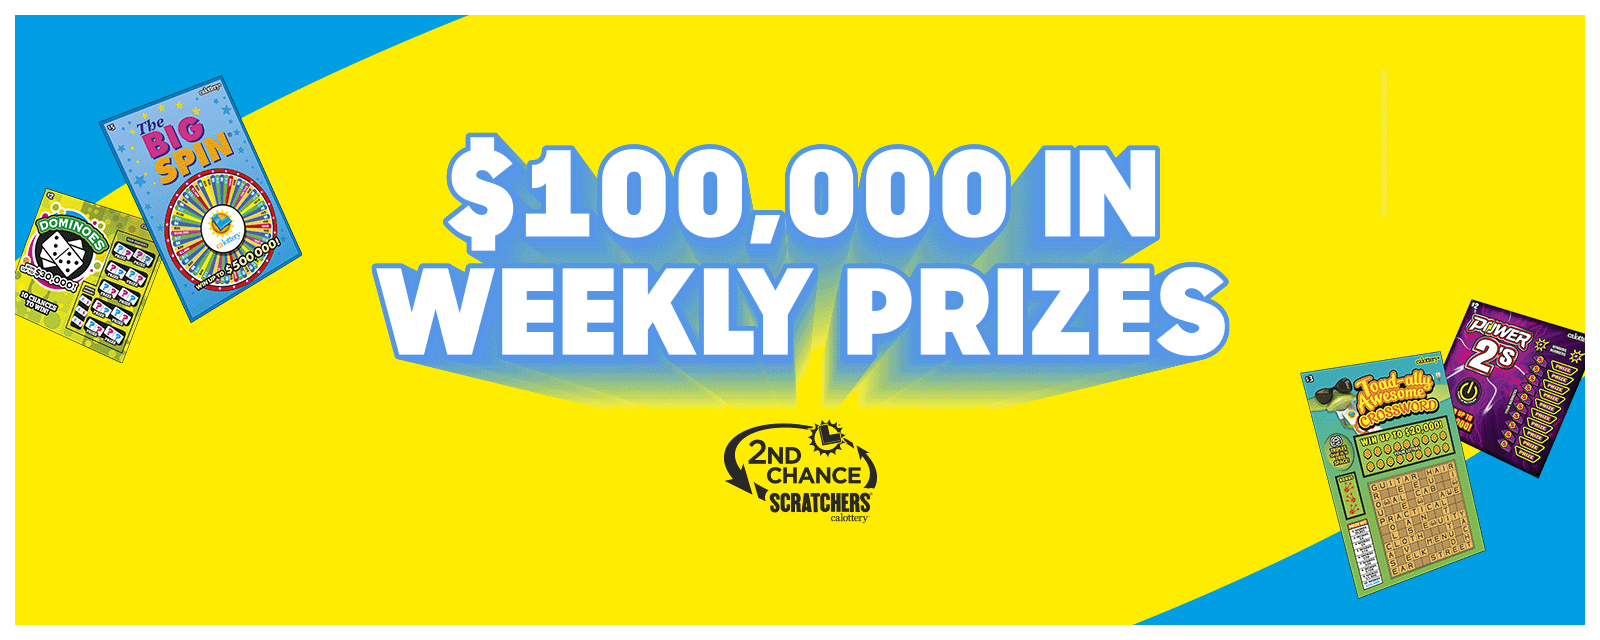 $100,000 In Weekly Prizes